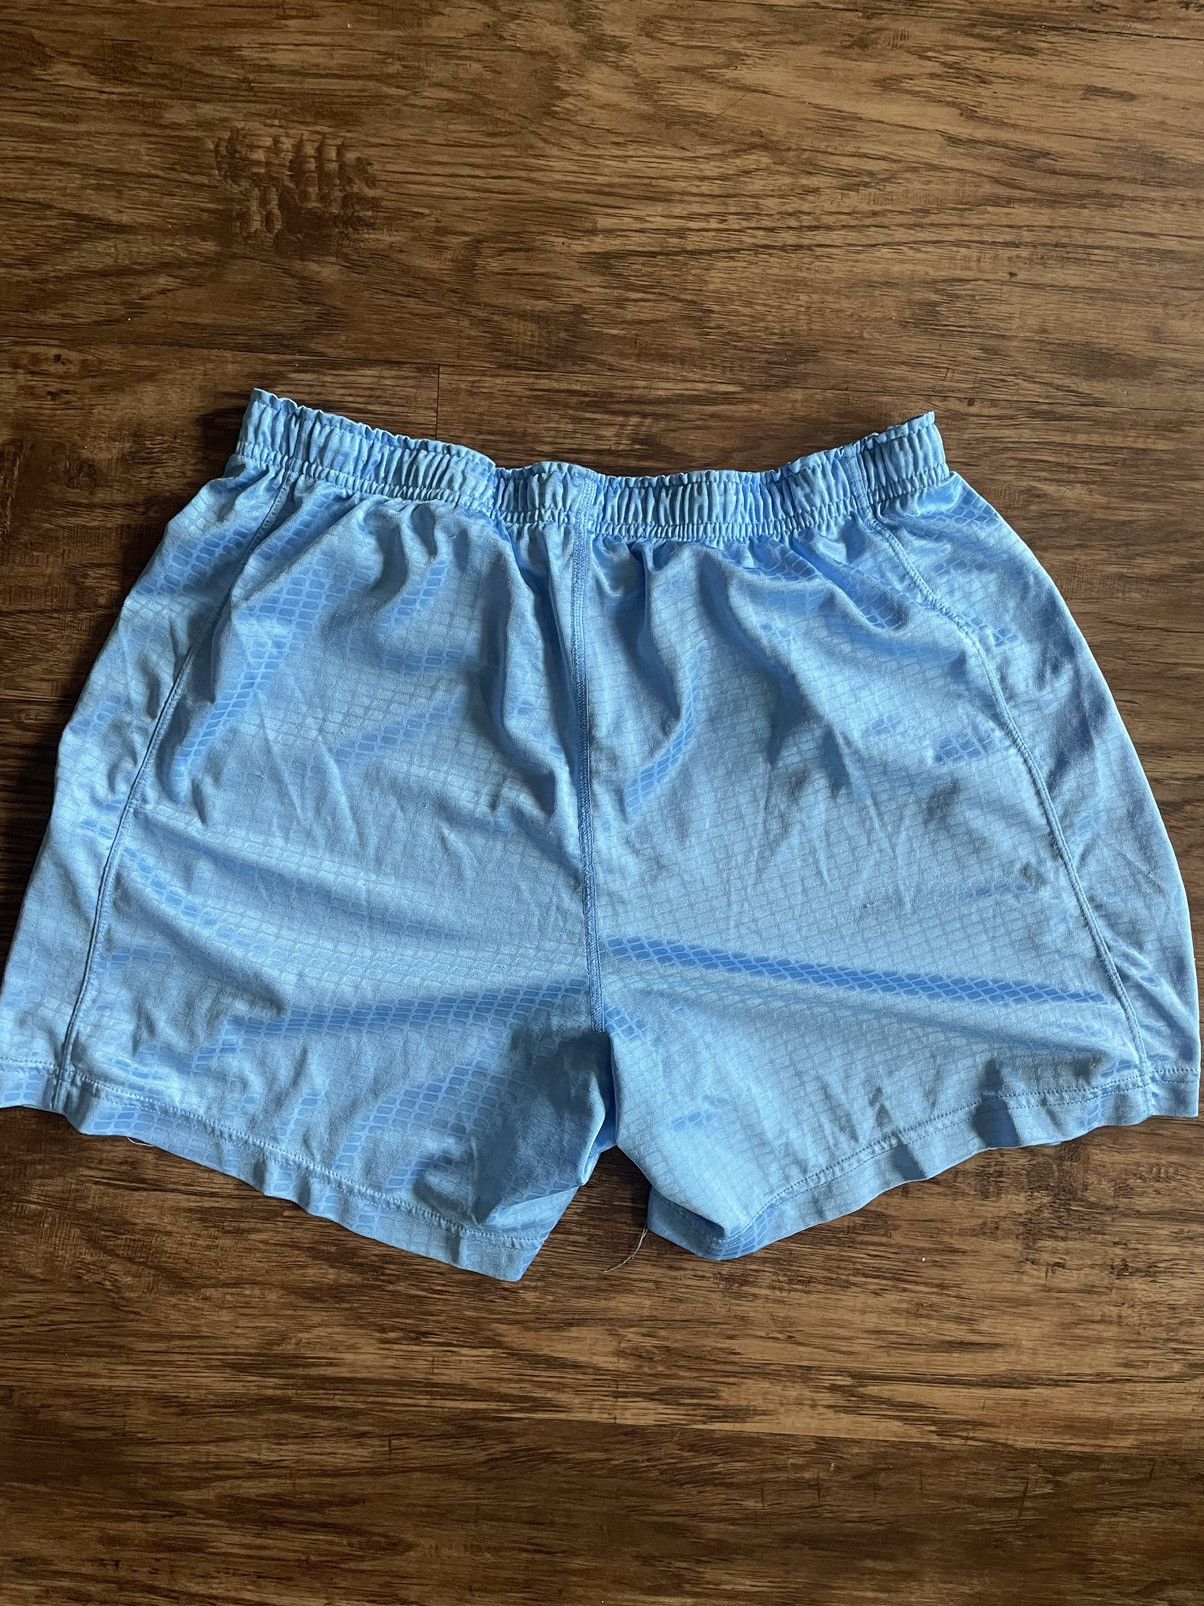 Nike Athletic shorts Size US 28 / EU 44 - 2 Preview